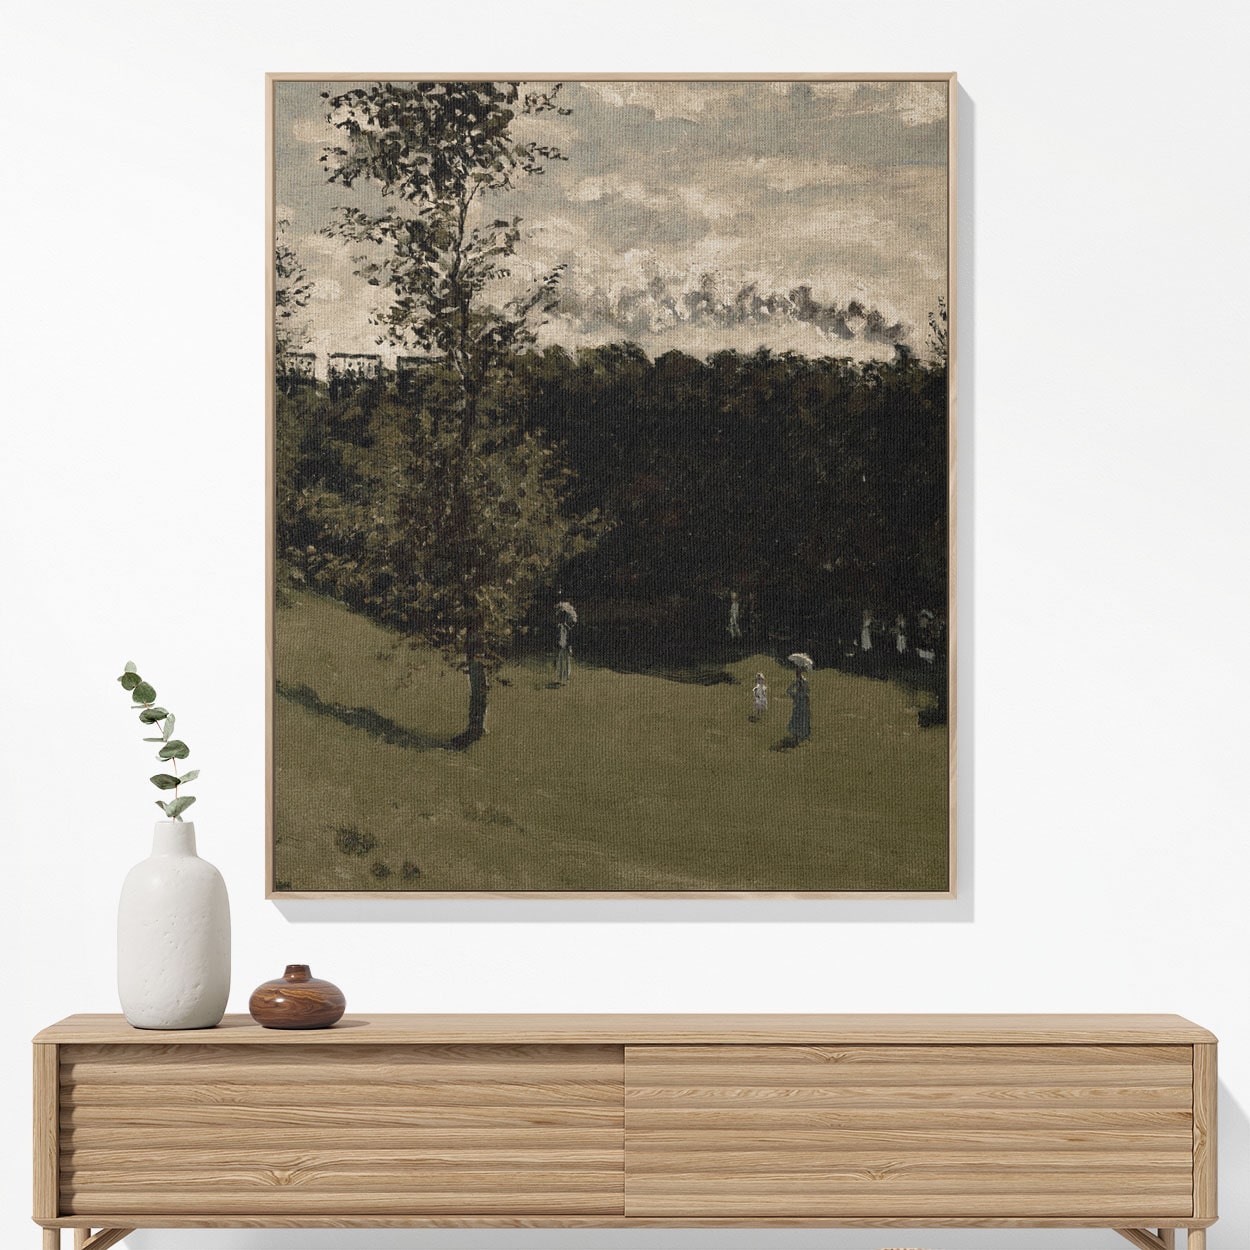 Sage Green Landscape Woven Blanket Woven Blanket Hanging on a Wall as Framed Wall Art